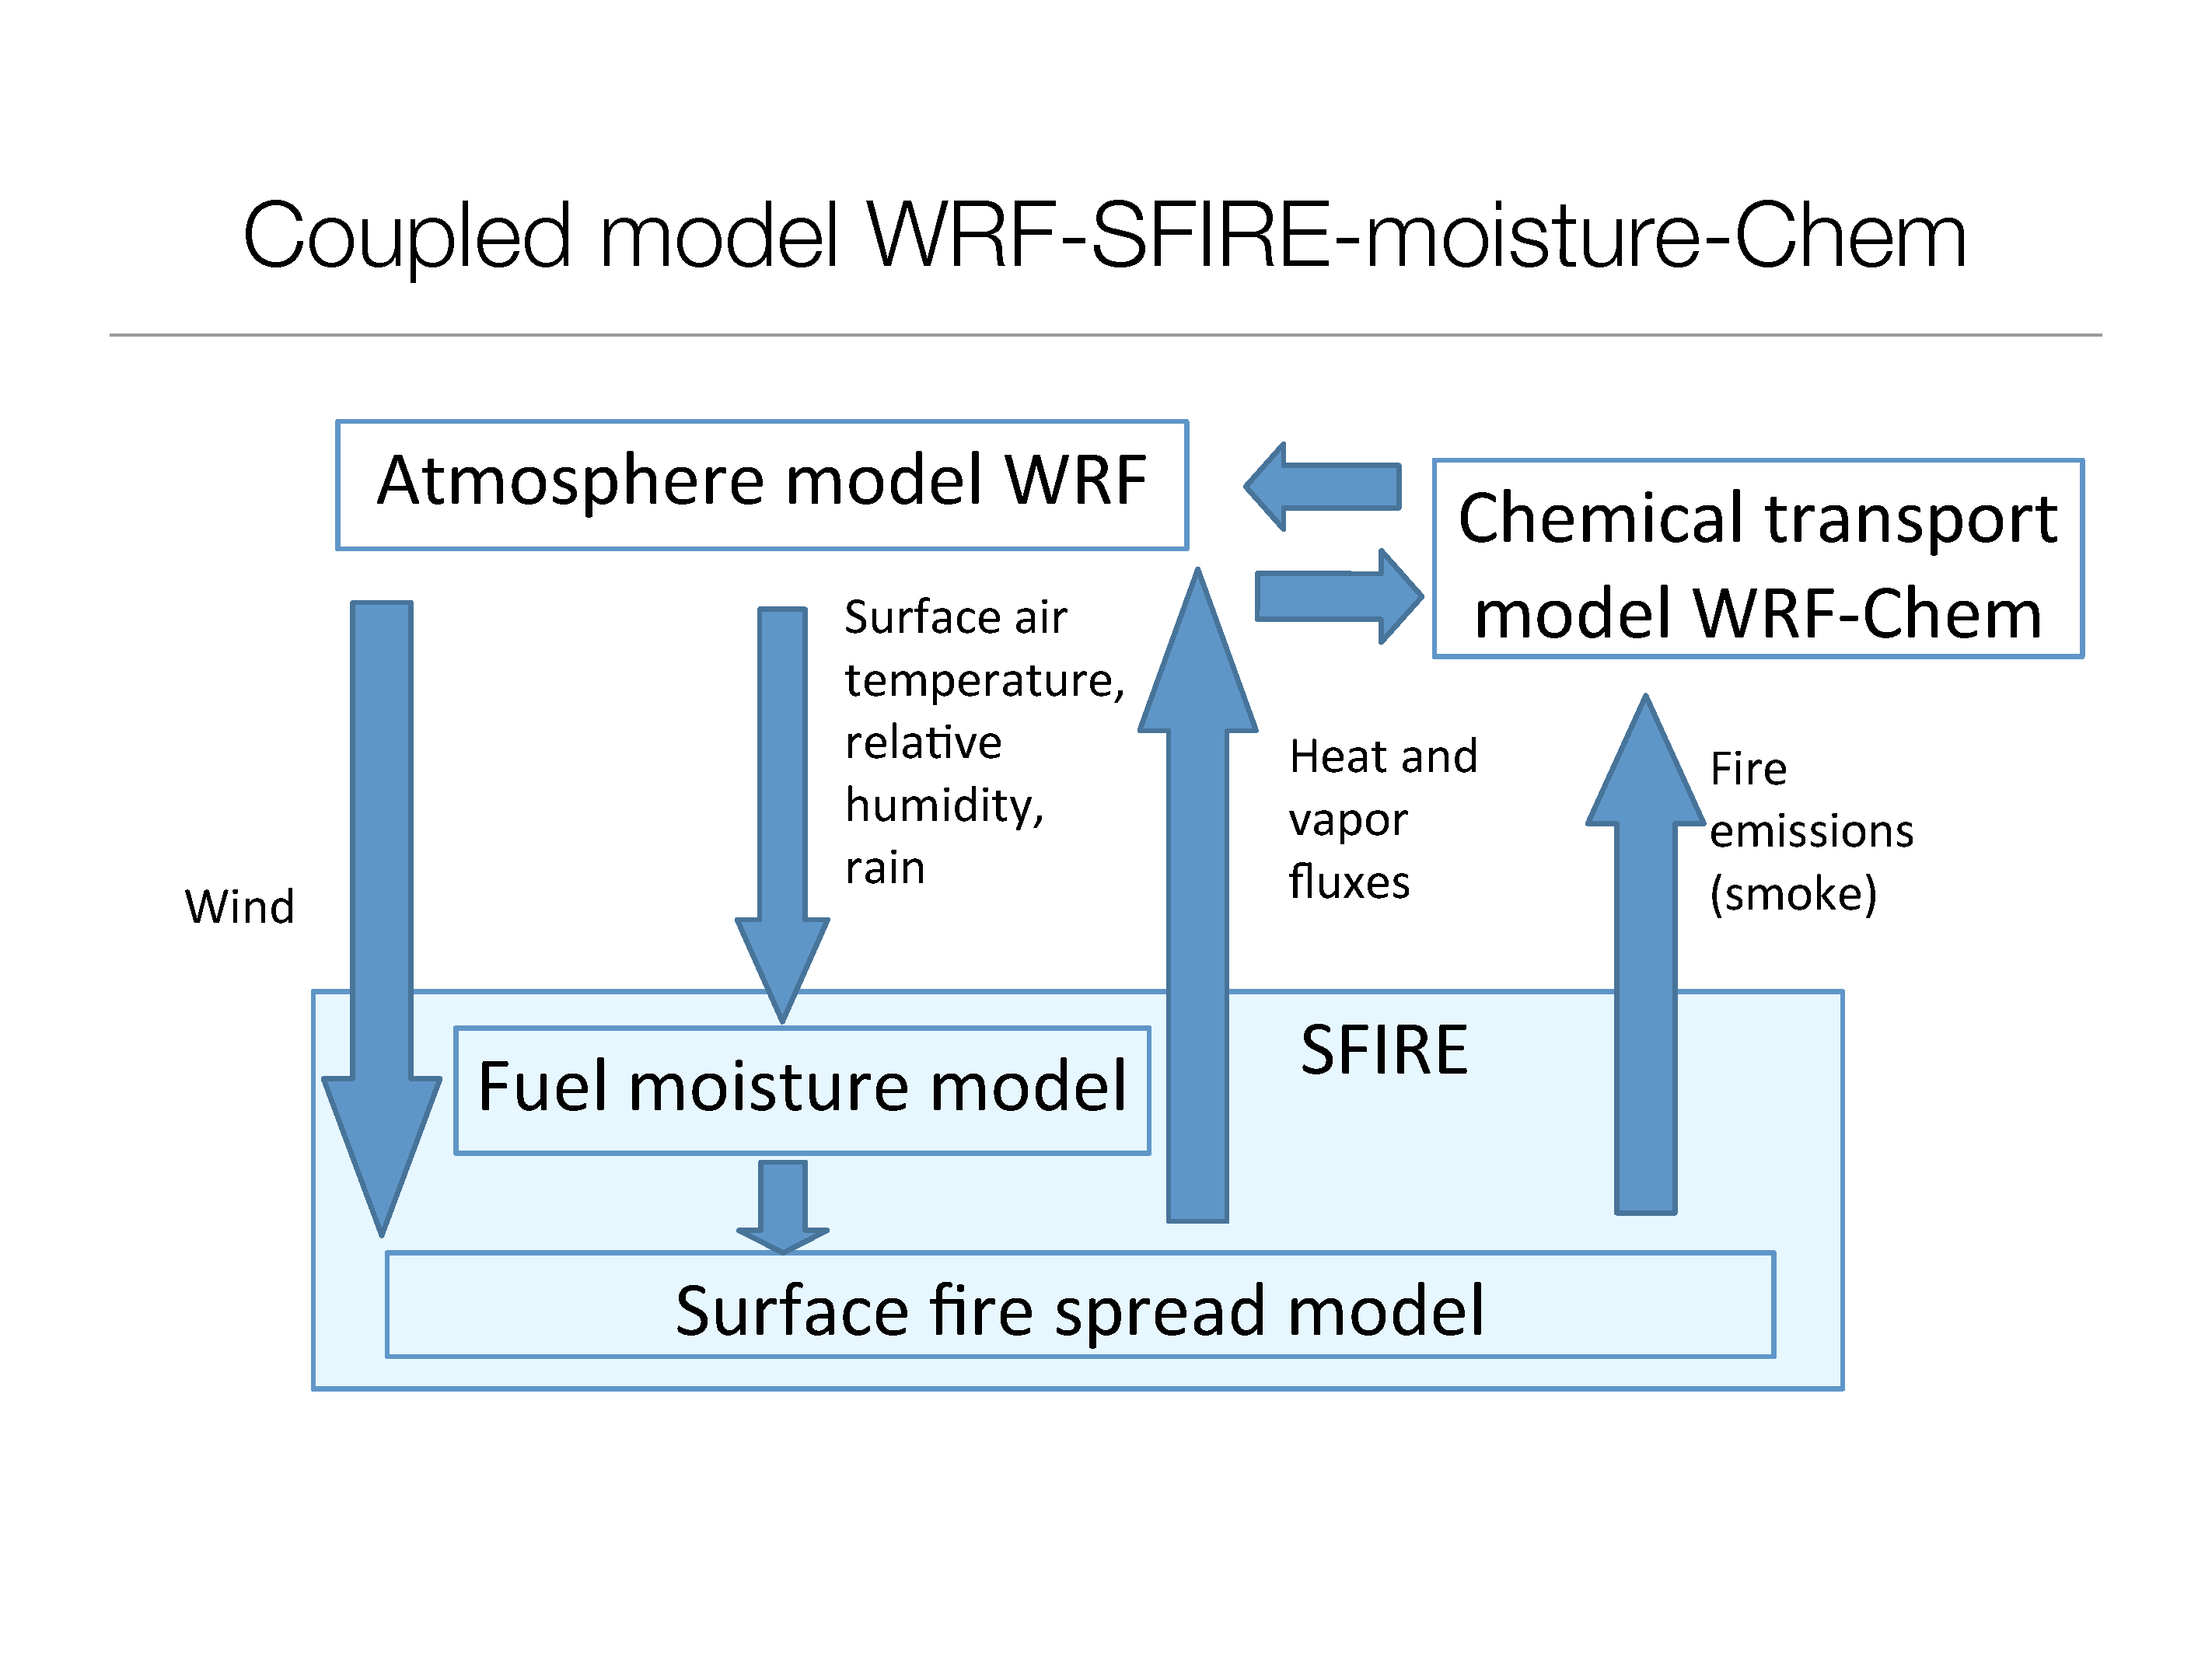 Coupled-wrf-fire-moisture-chem.png